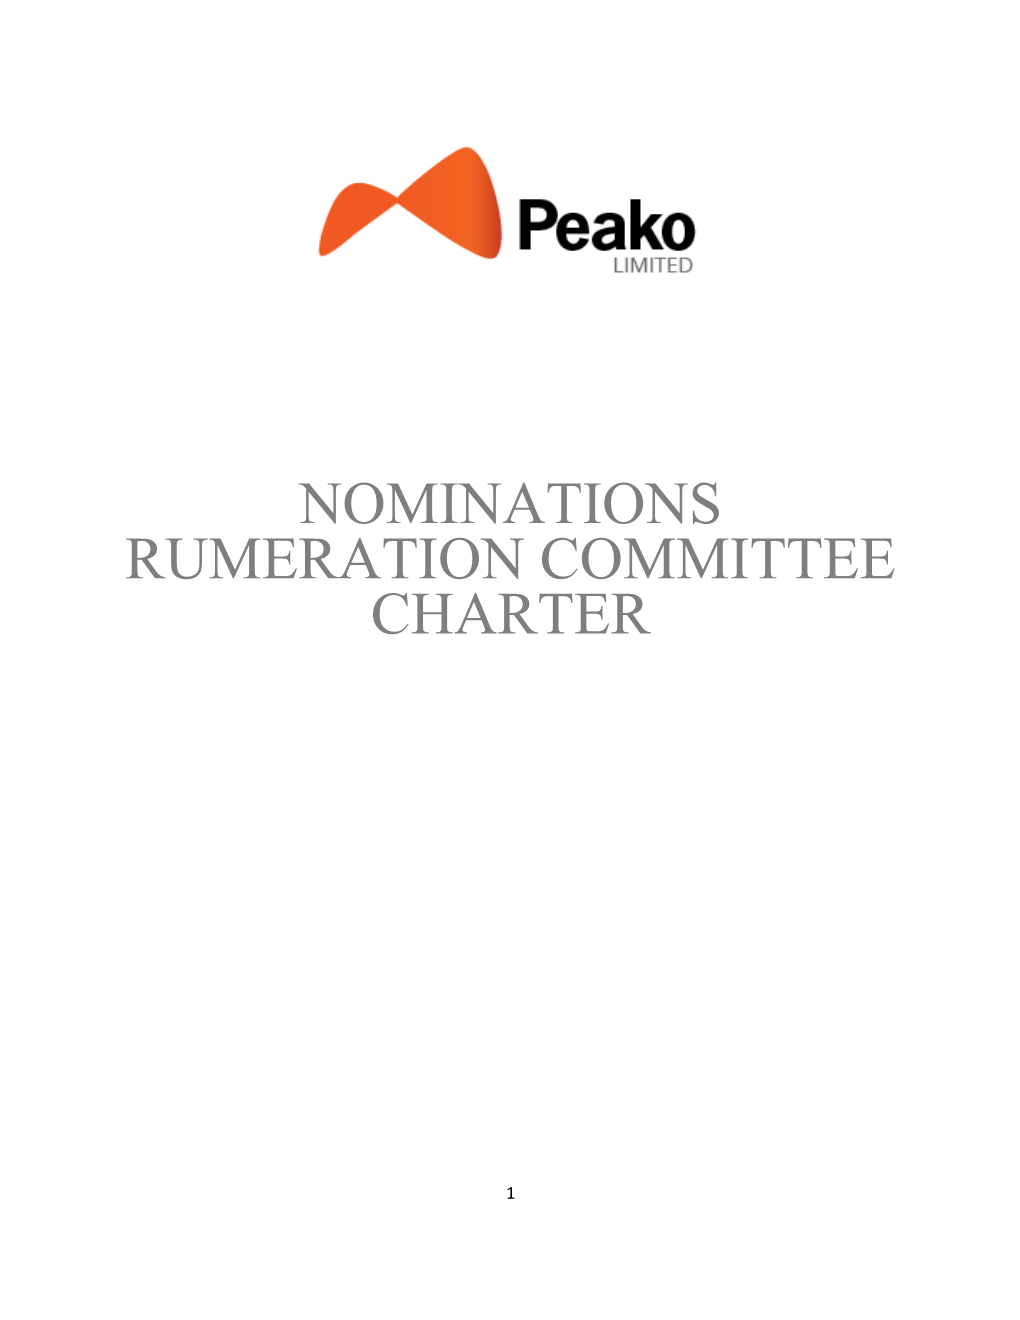 Nominations Rumeration Committee Charter